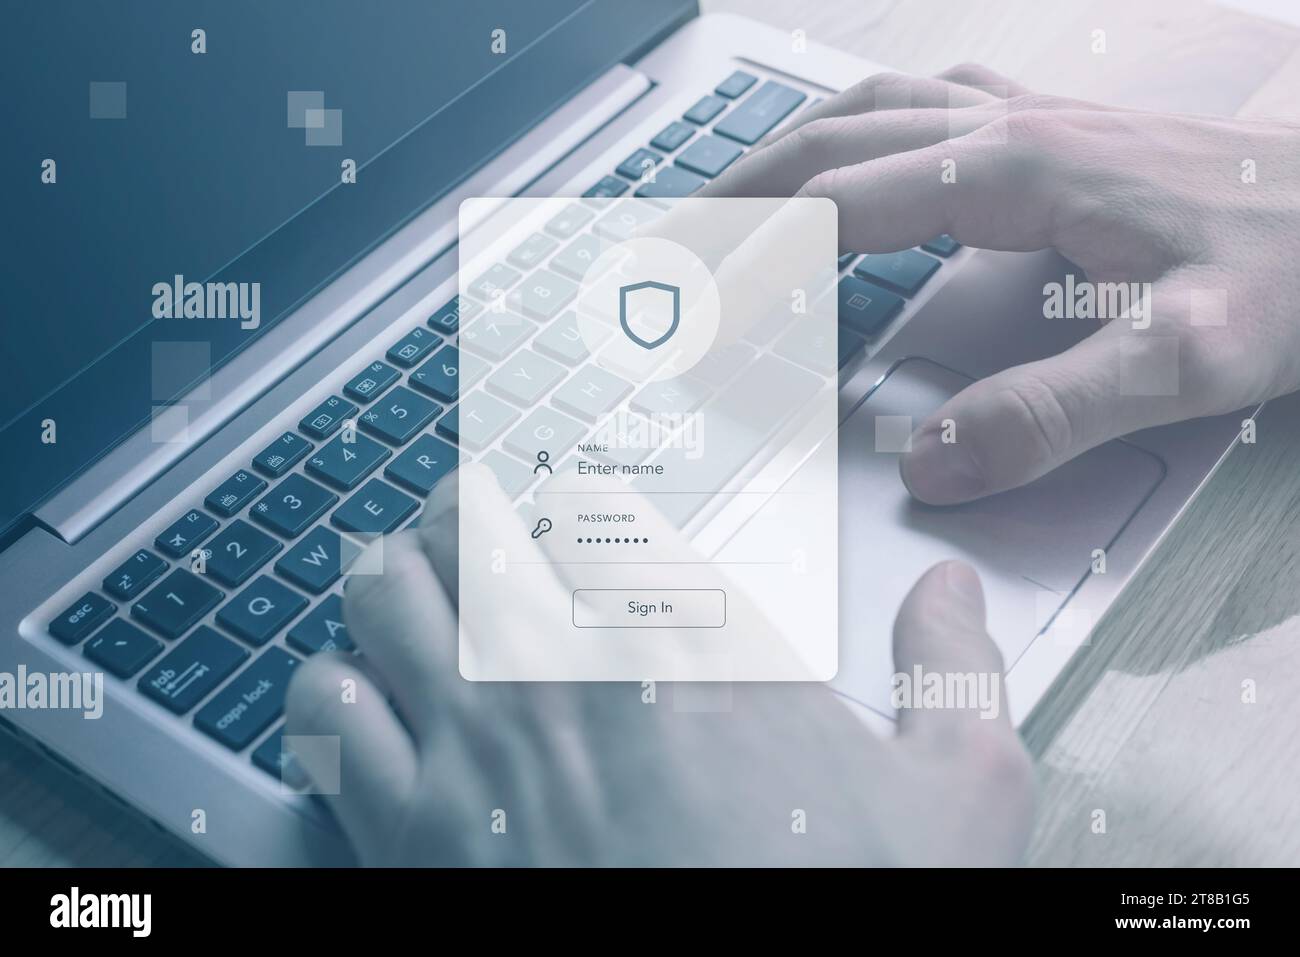 Autentication login form concept with hands on a laptop. Seamless security integration for a clean and functional tech visual Stock Photo